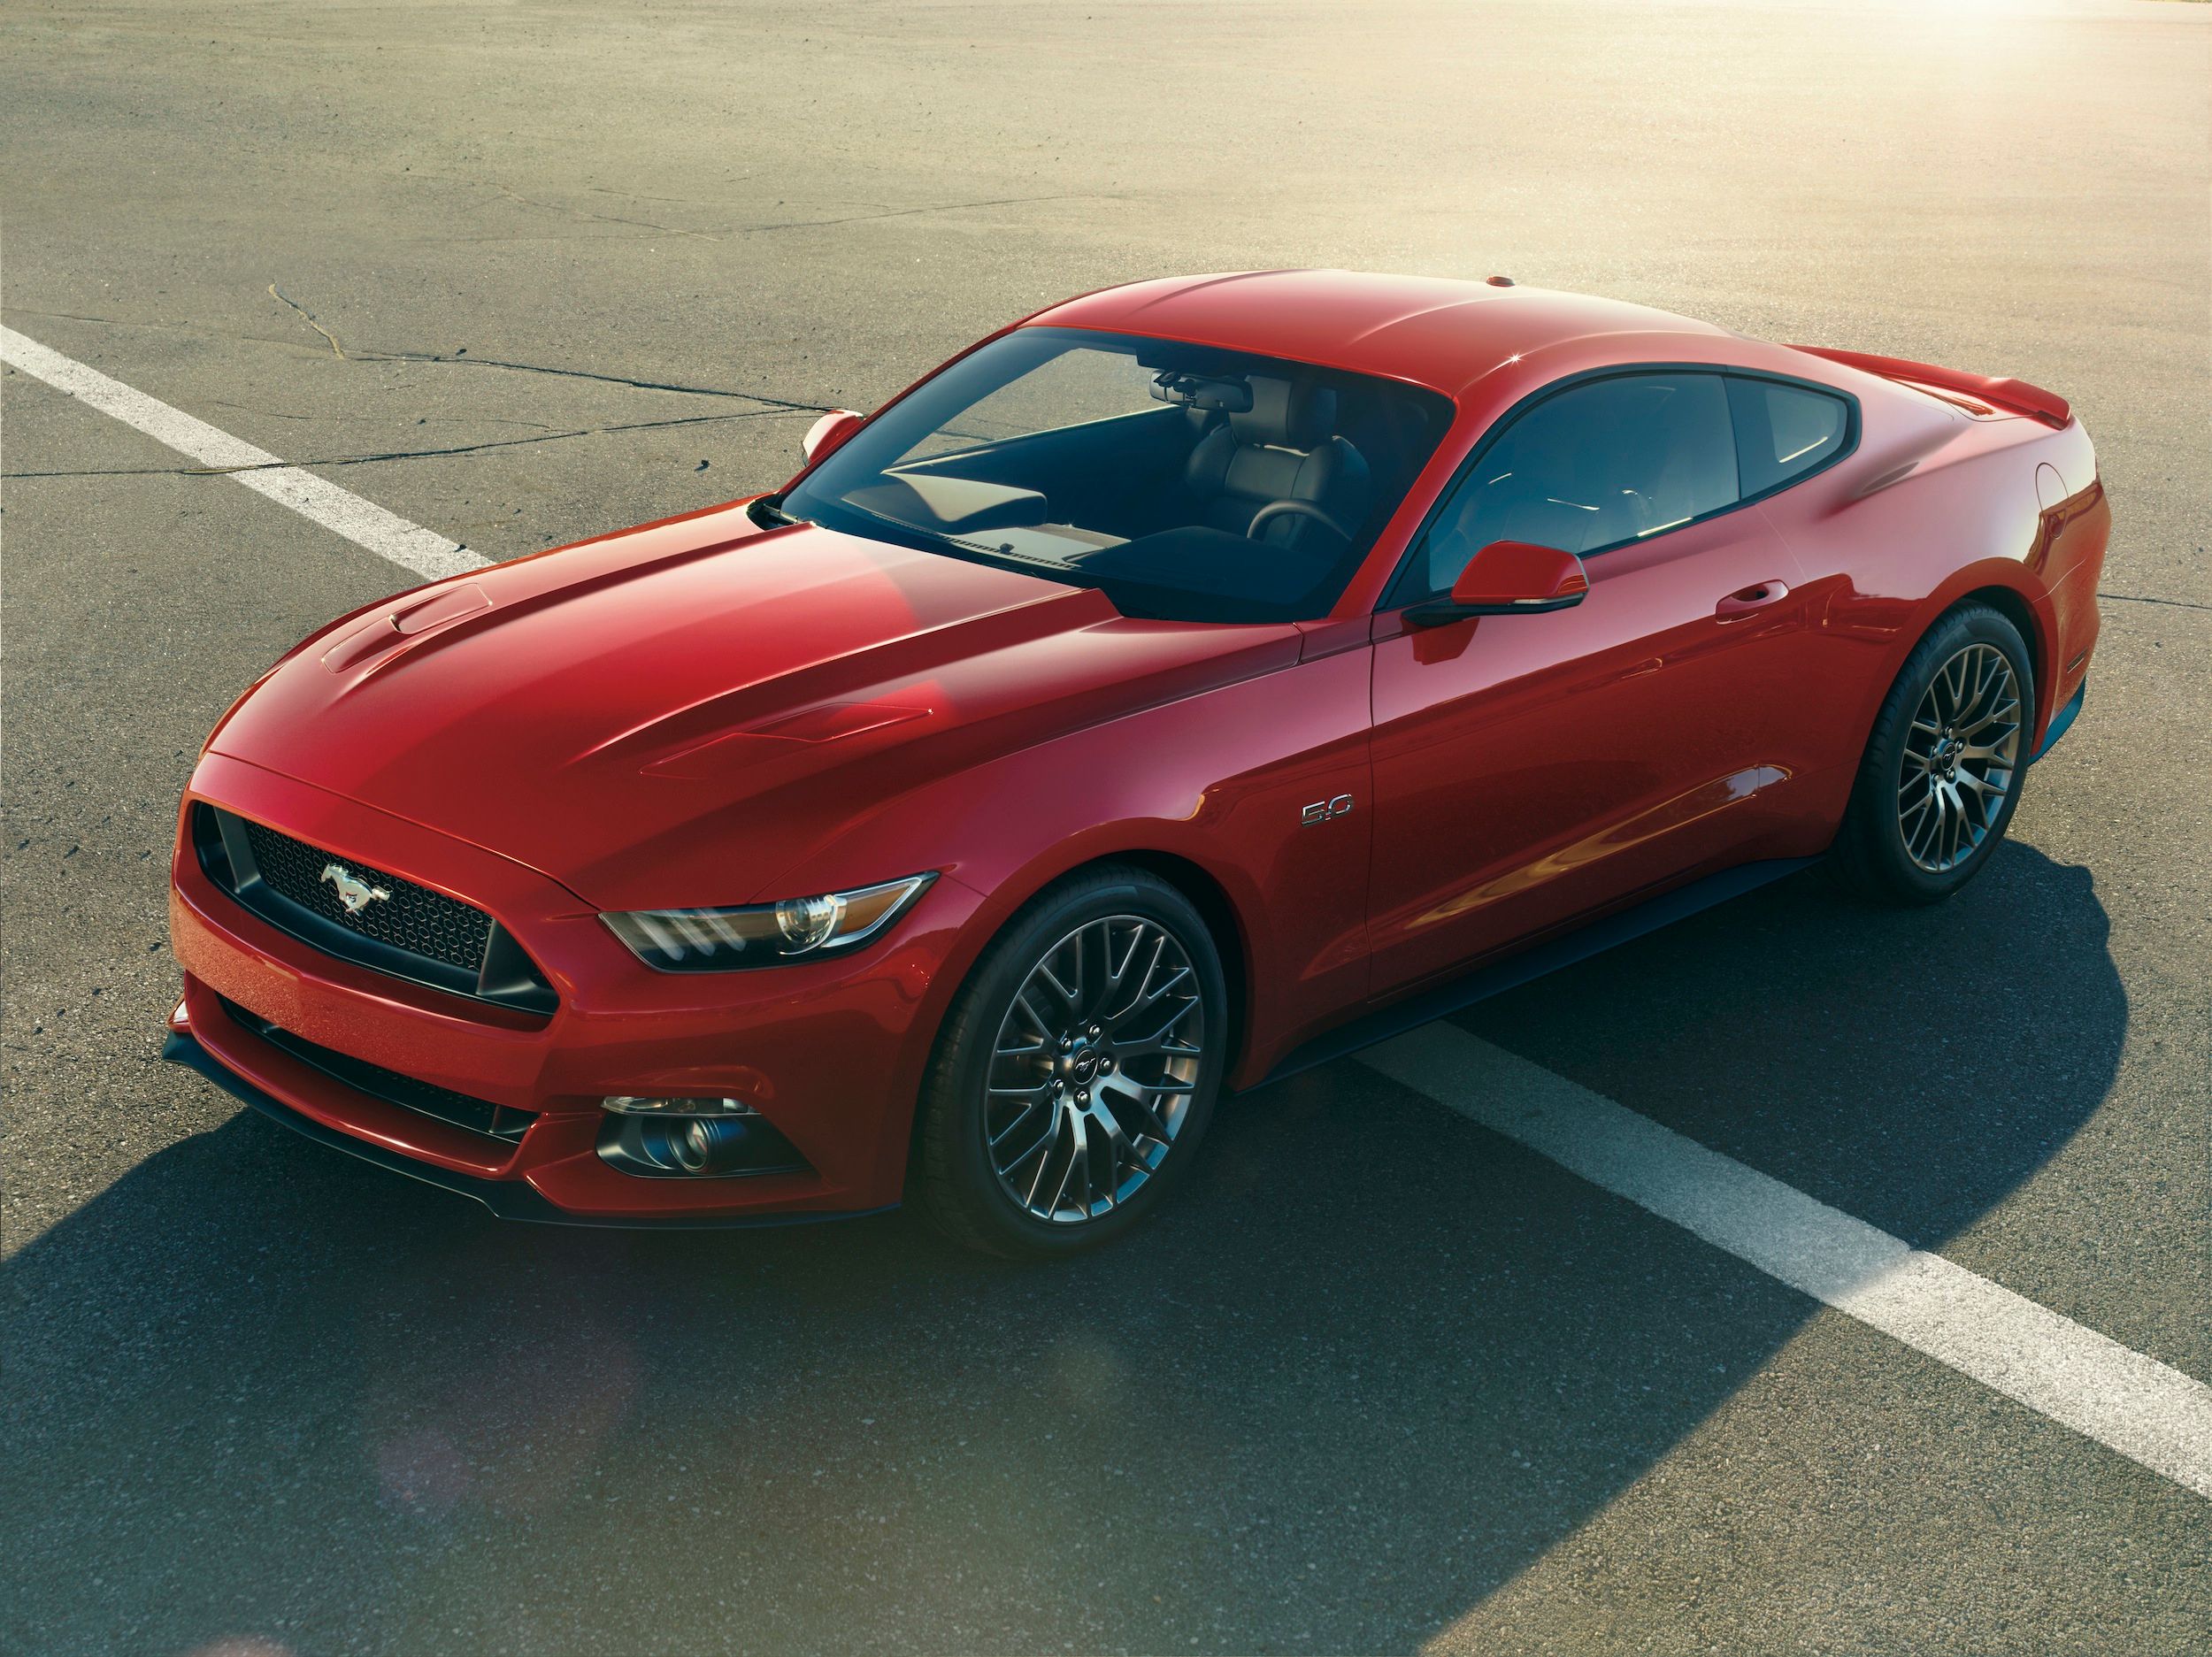 A Girls Guide To Cars | Ford Pulls A Great Valentine'S Prank With The Mustang - 15Mustang Gt Embargoed 1201Am 12.05.13